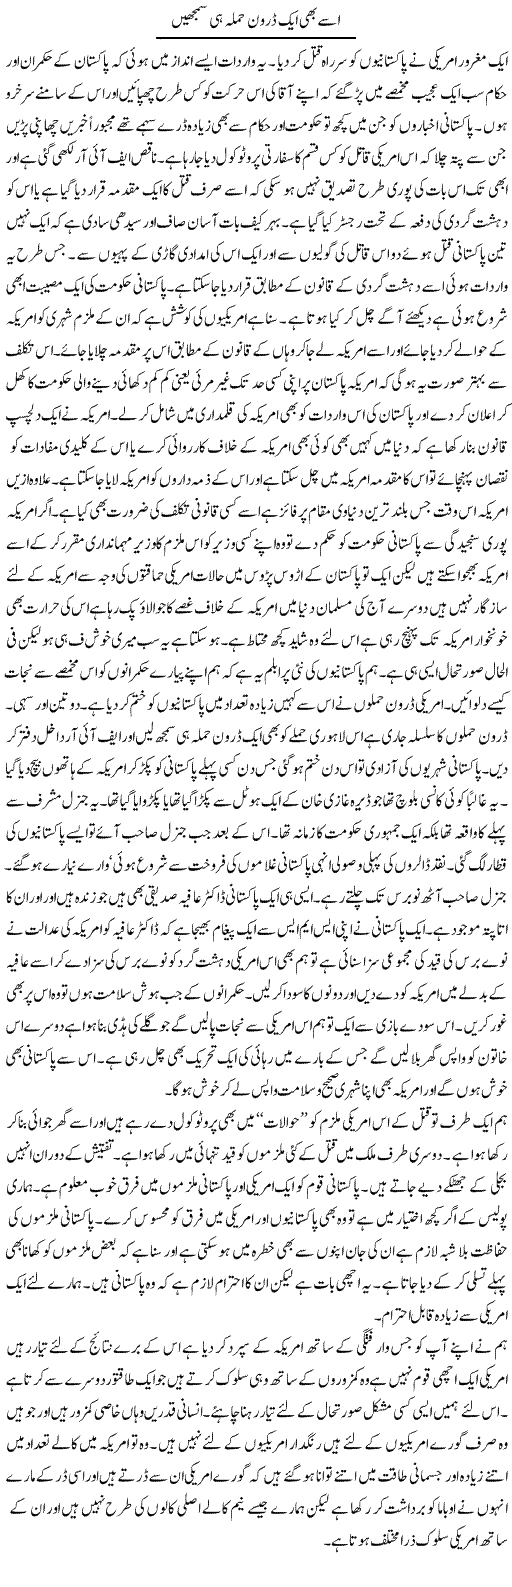 Another Type of Drone Attack Express Column Abdul Qadir 30 January 2011